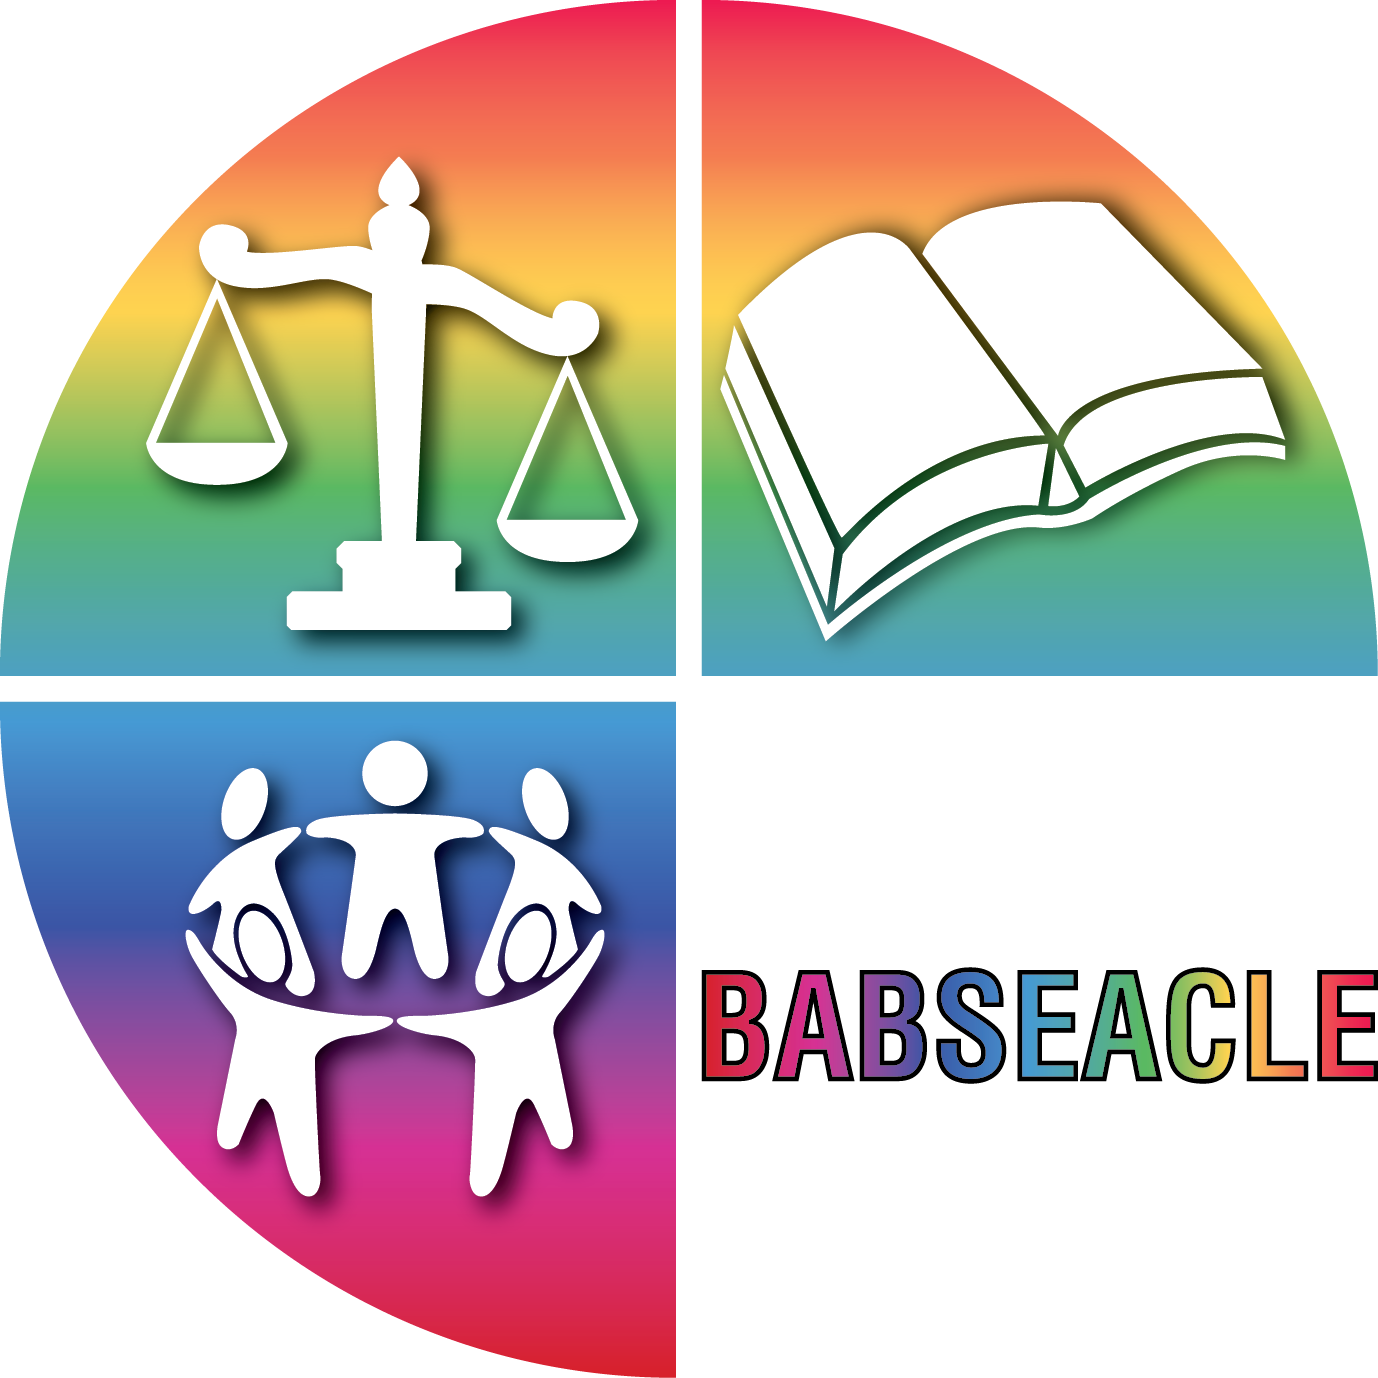 BABSEACLE Logo Transparent Background